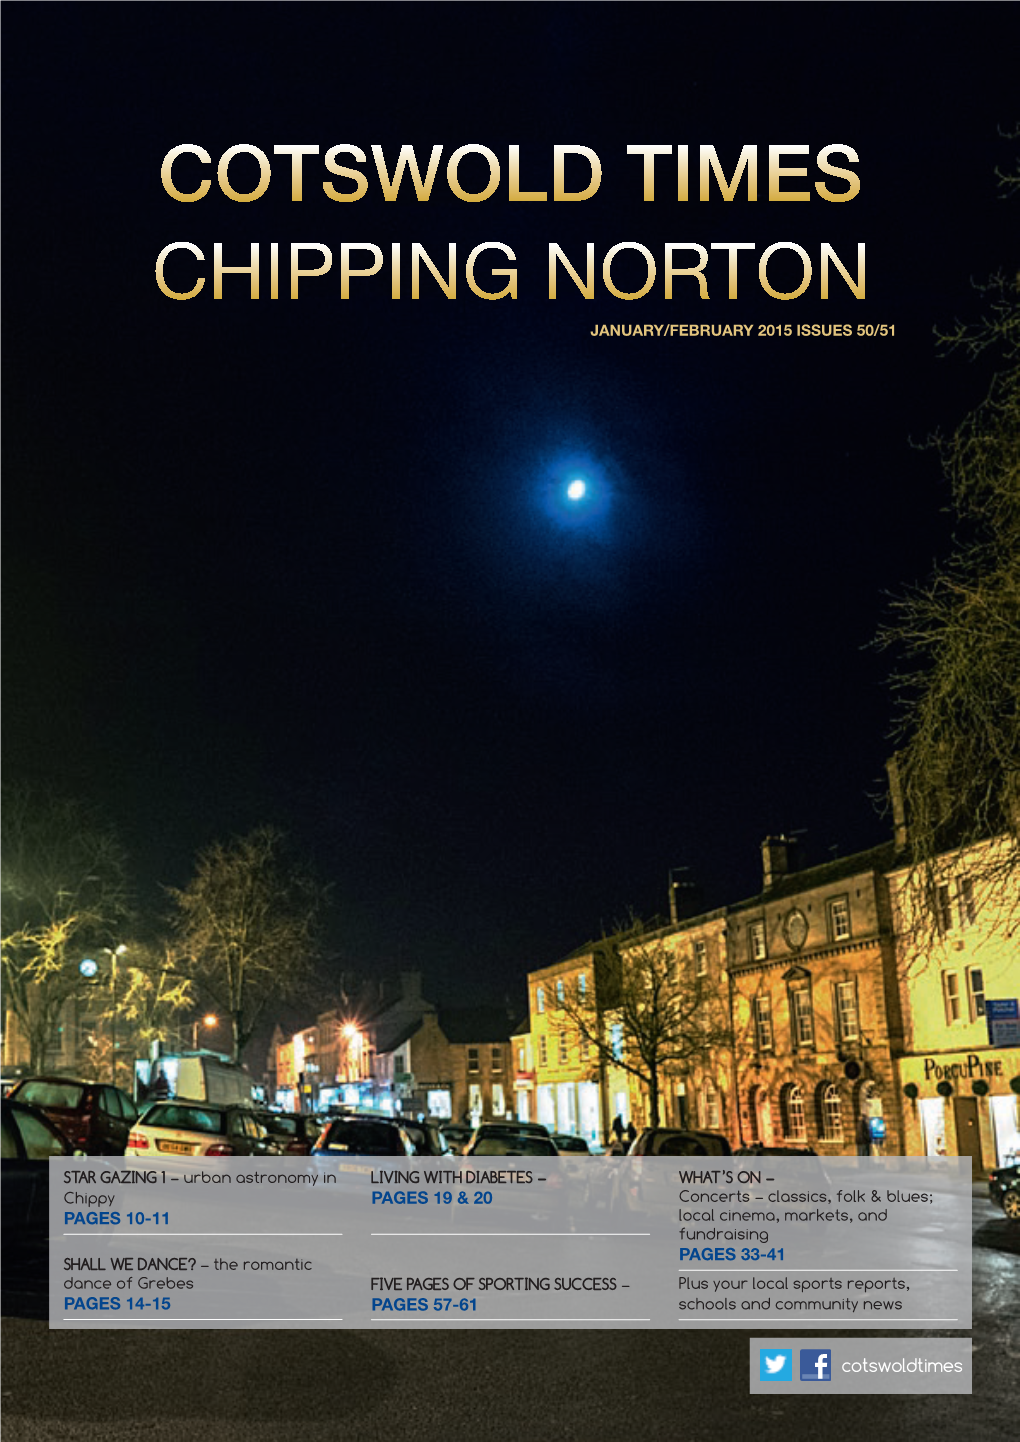 Cotswold Times Chipping Norton January/February 2015 Issues 50/51